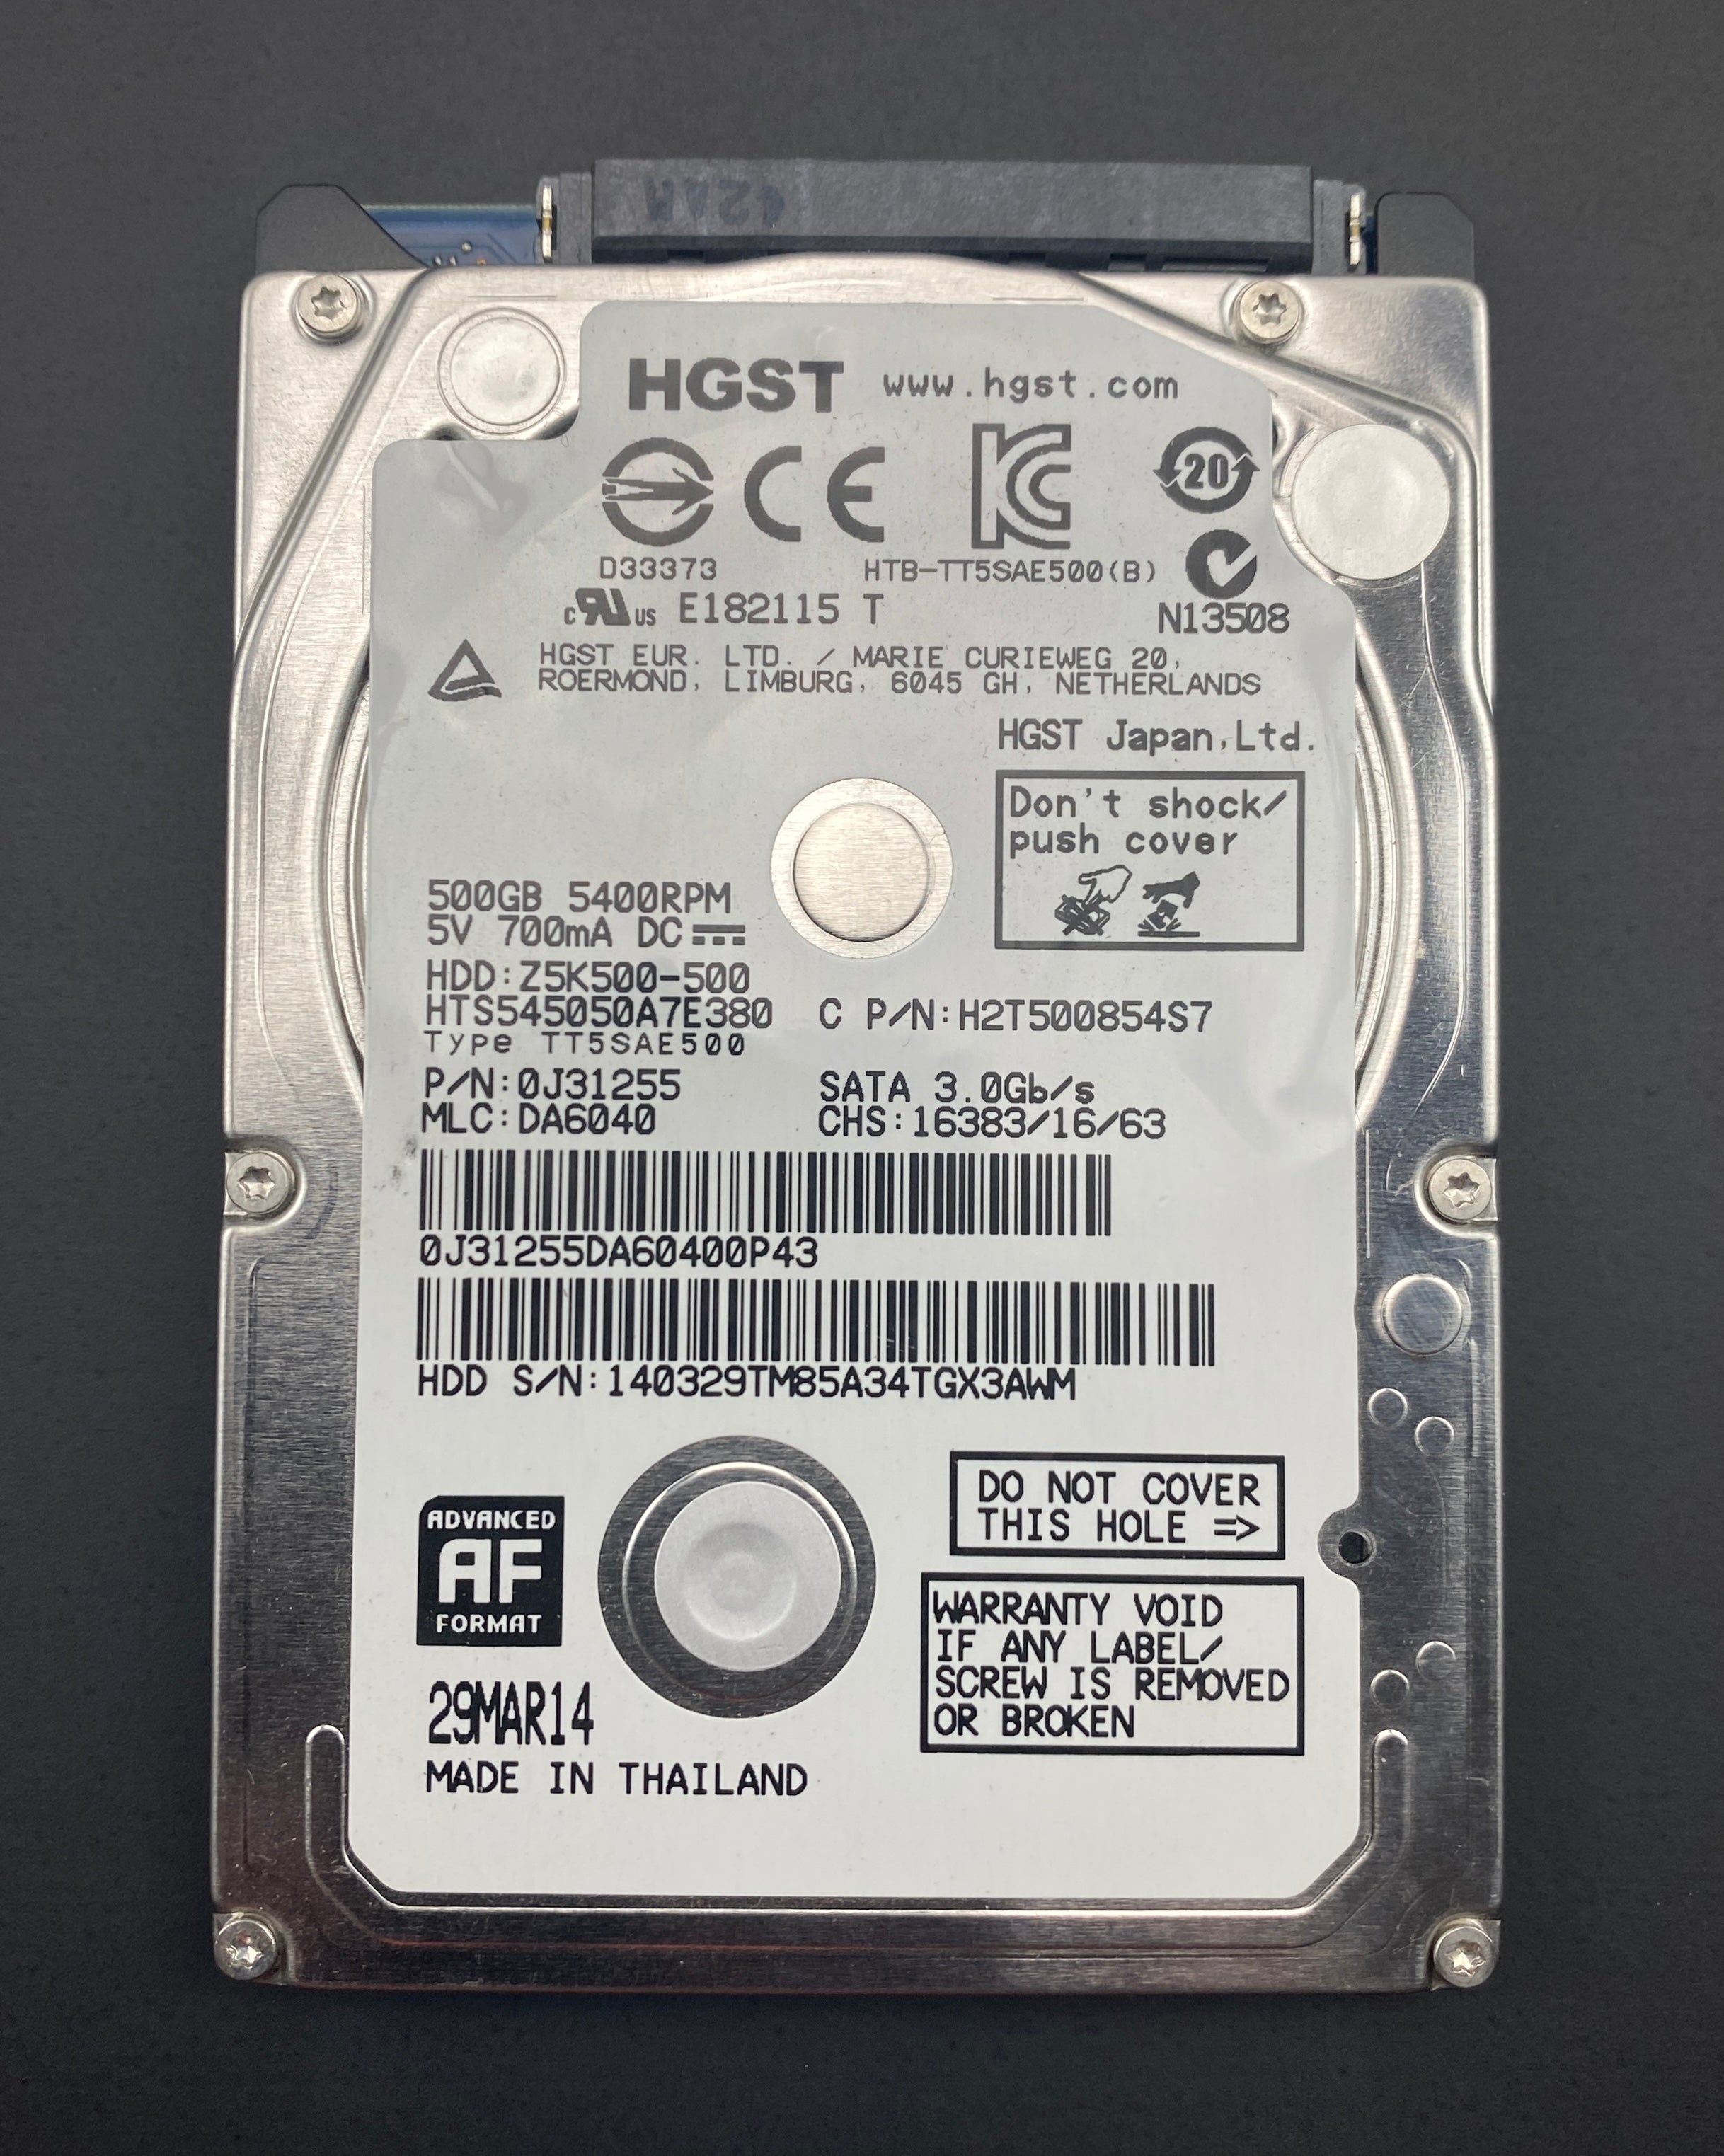 PS4 Hard Drive Used HGST 500 Gb Sony PlayStation 4 - CUH-1001A